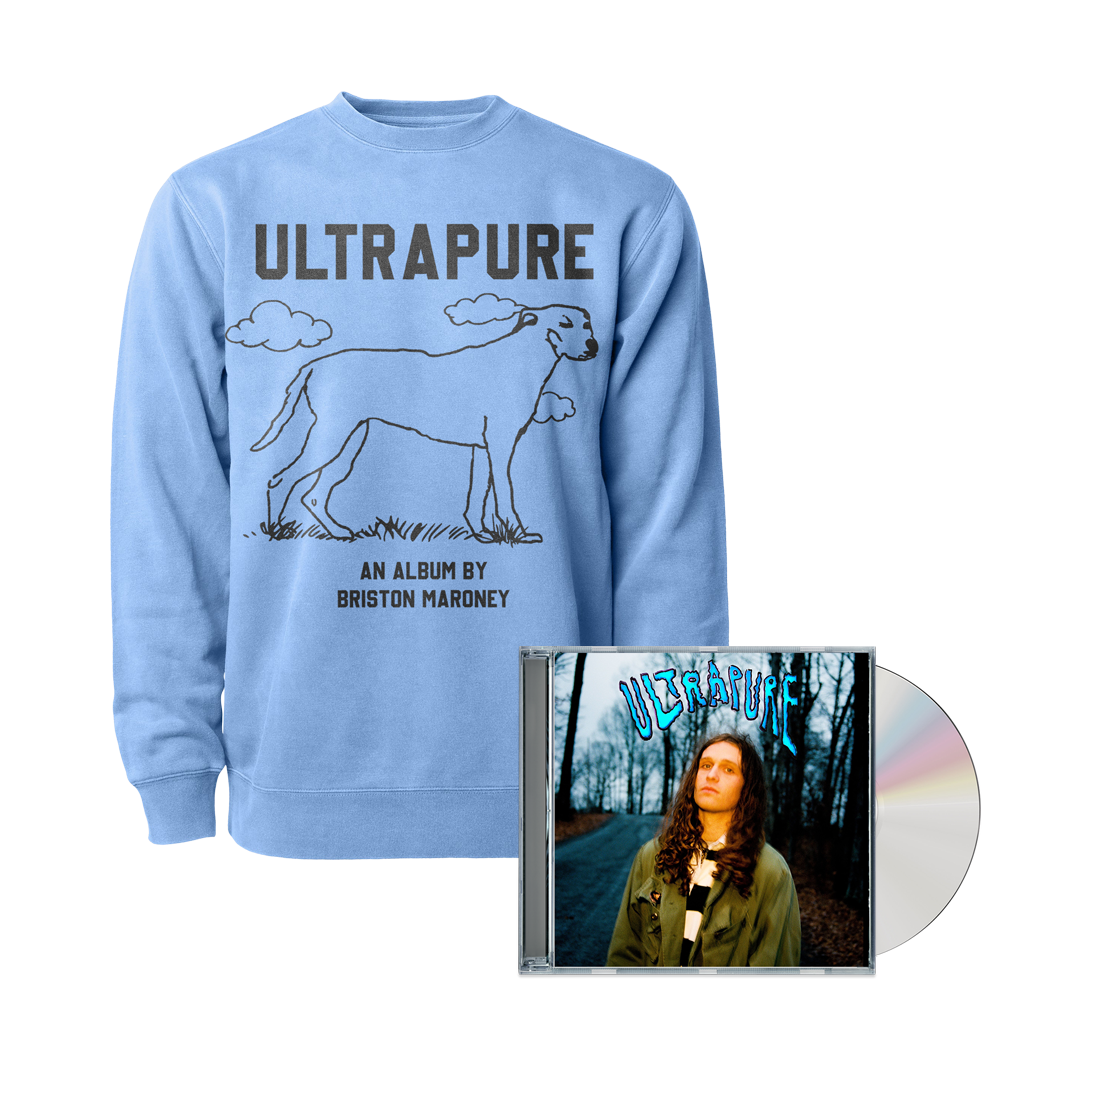 Ultrapure CD and Crewneck Fan Pack